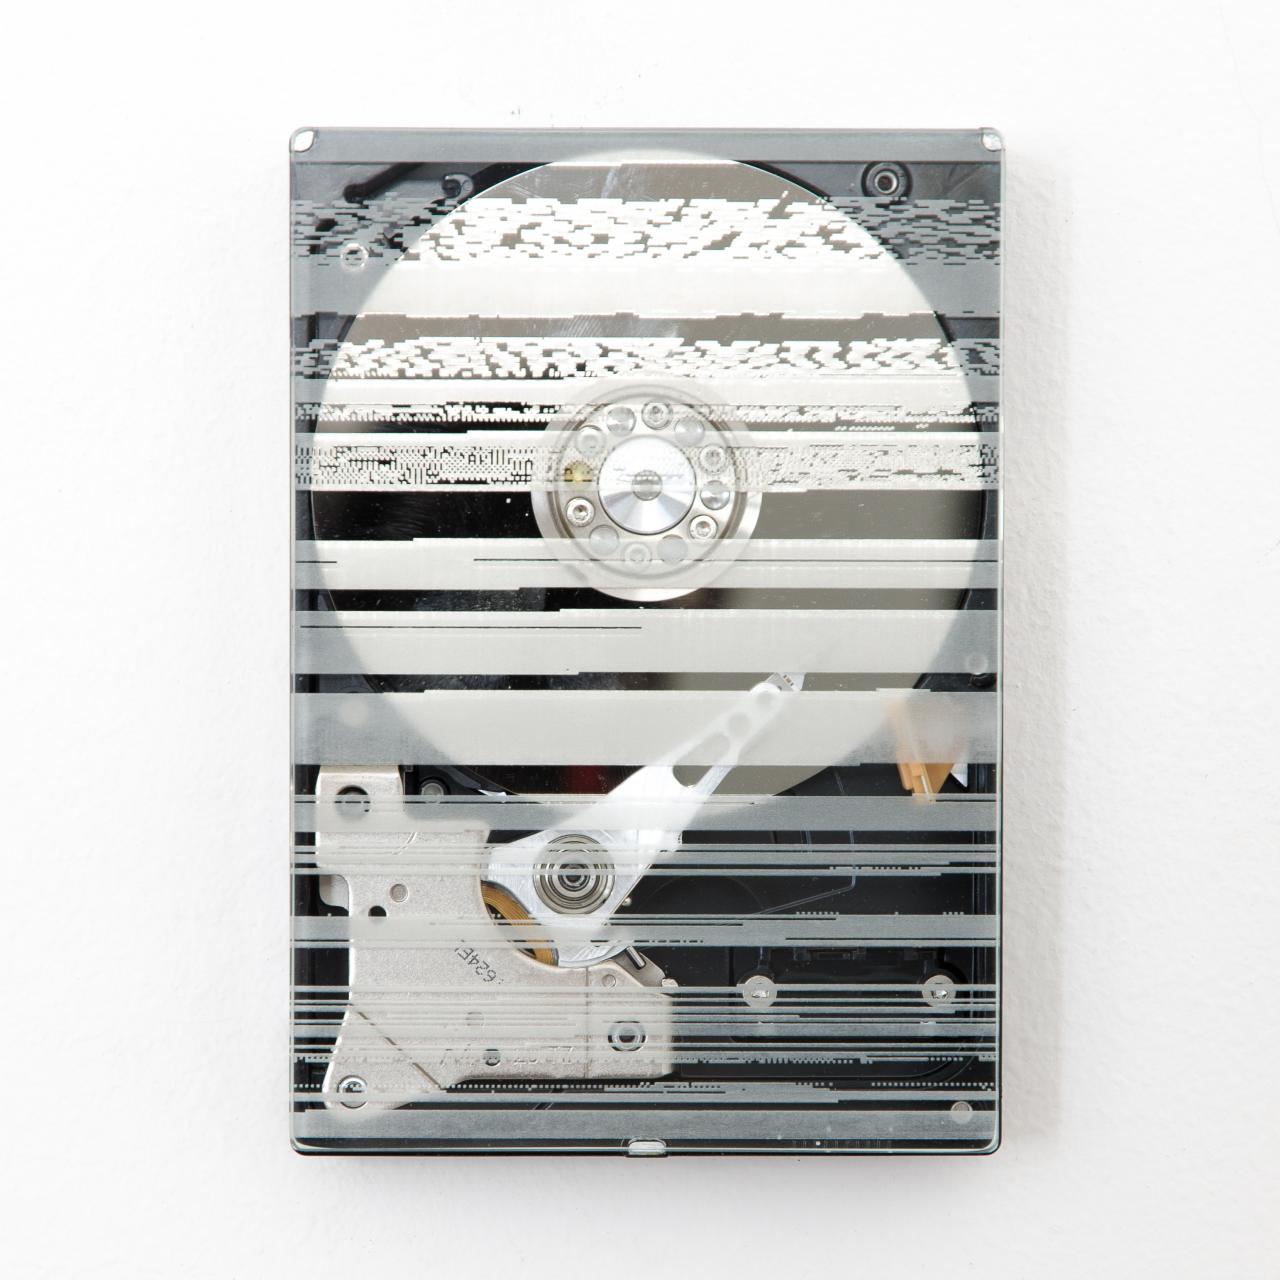 Wall installation of a transparent hard disk with engravings